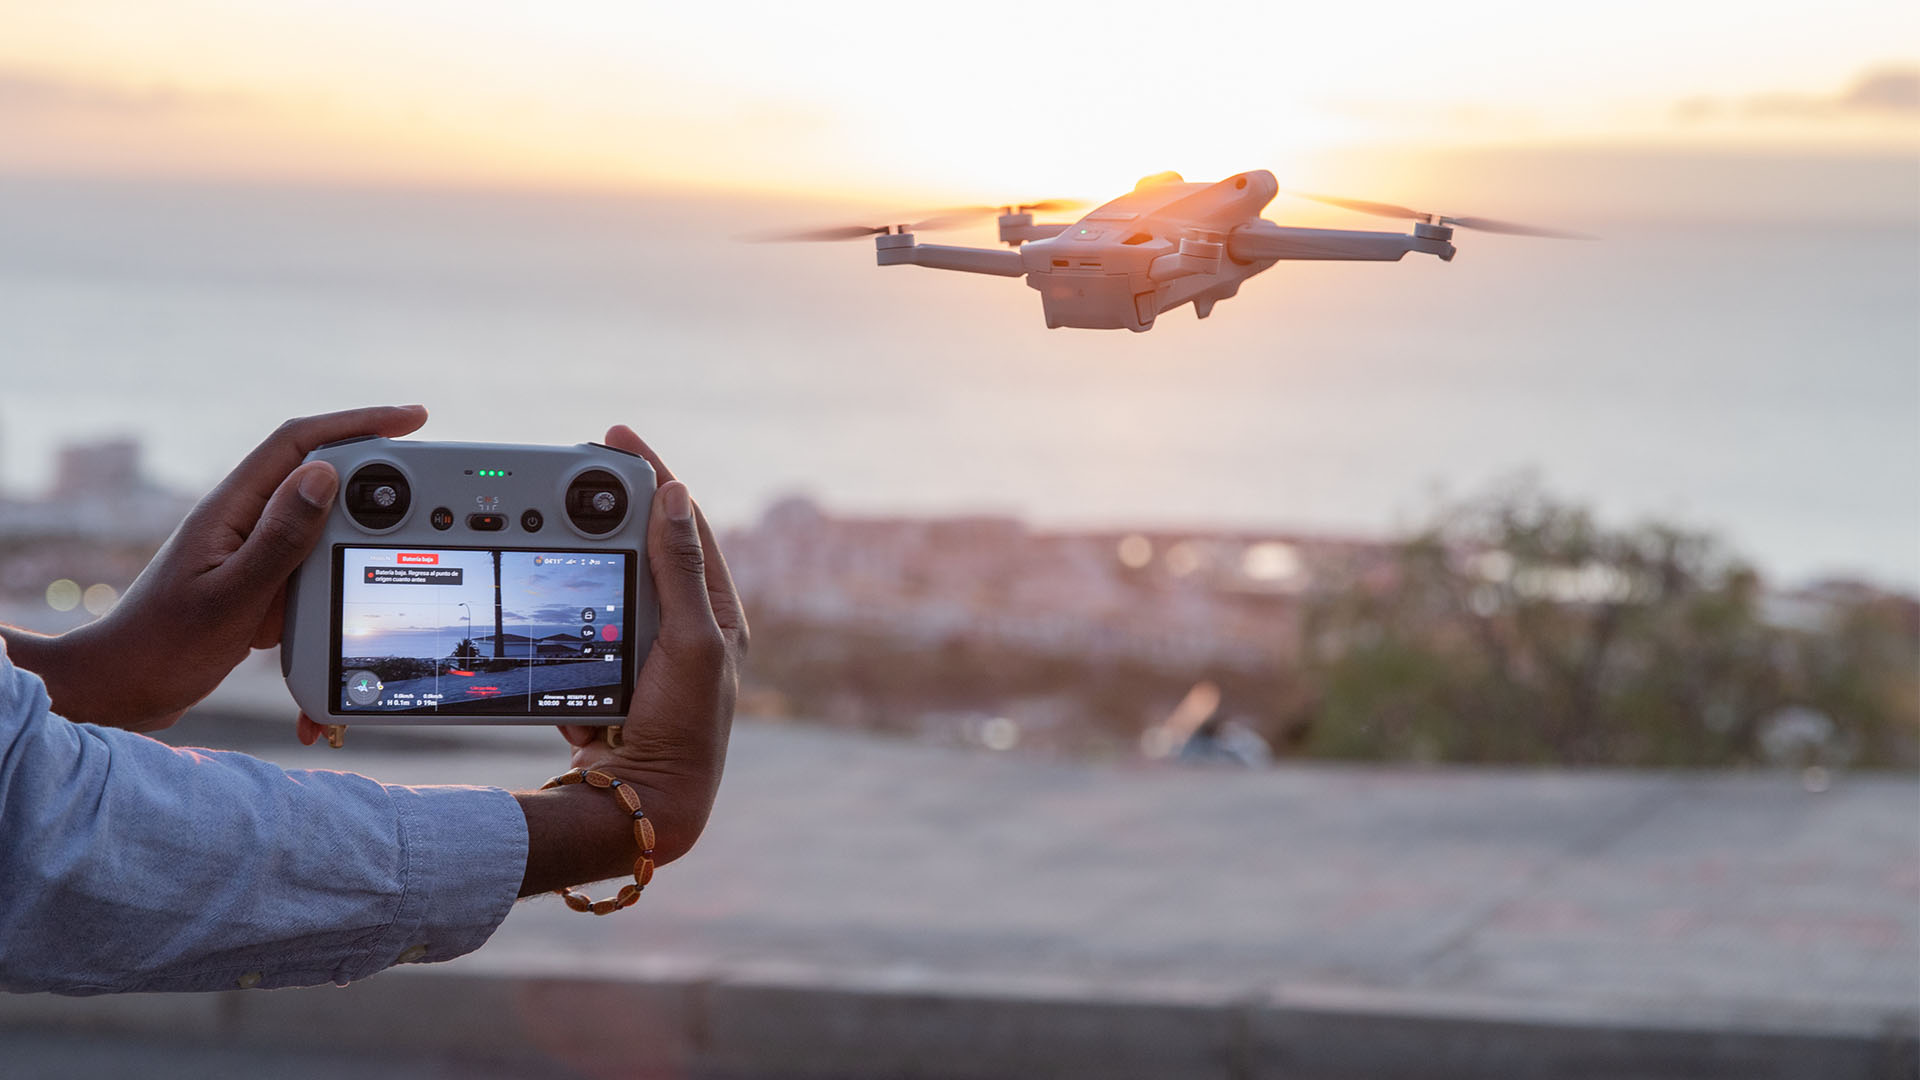 Soaring High with Your New DJI Mini Drone in the UK